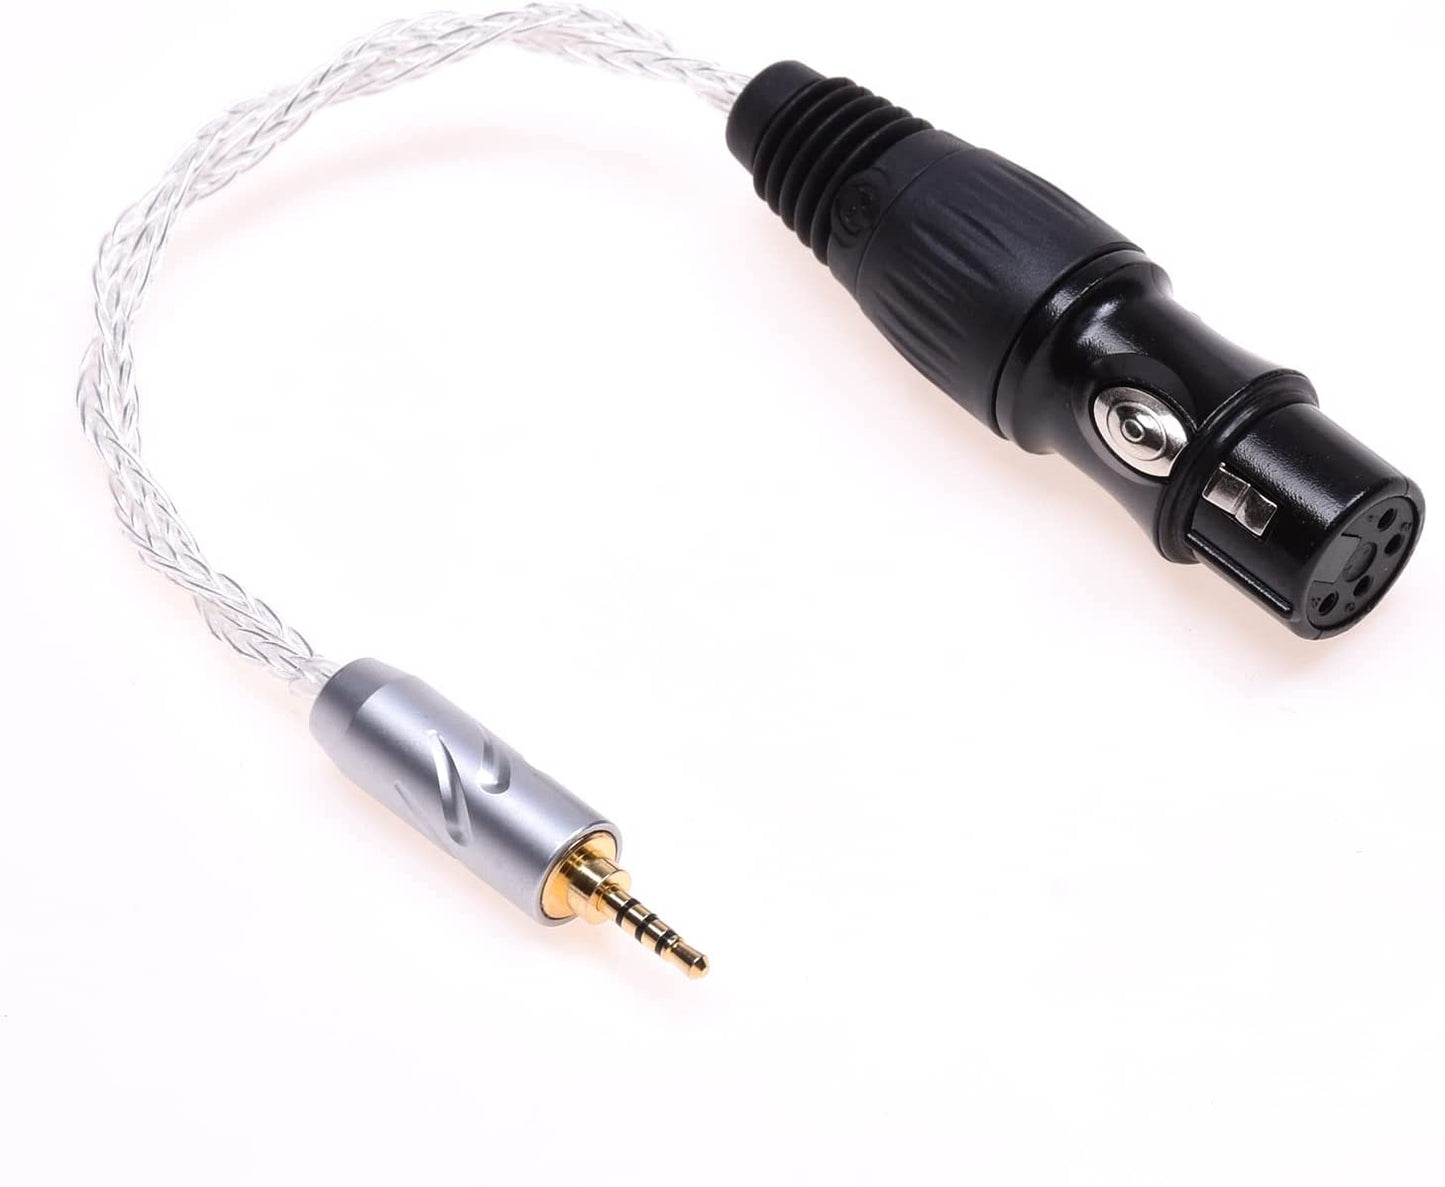 2.5mm Adapter 16 Cores Silver Plated Cable trrs 2.5mm Male to 4Pin XLR Female Balanced Audio Adapter Cable